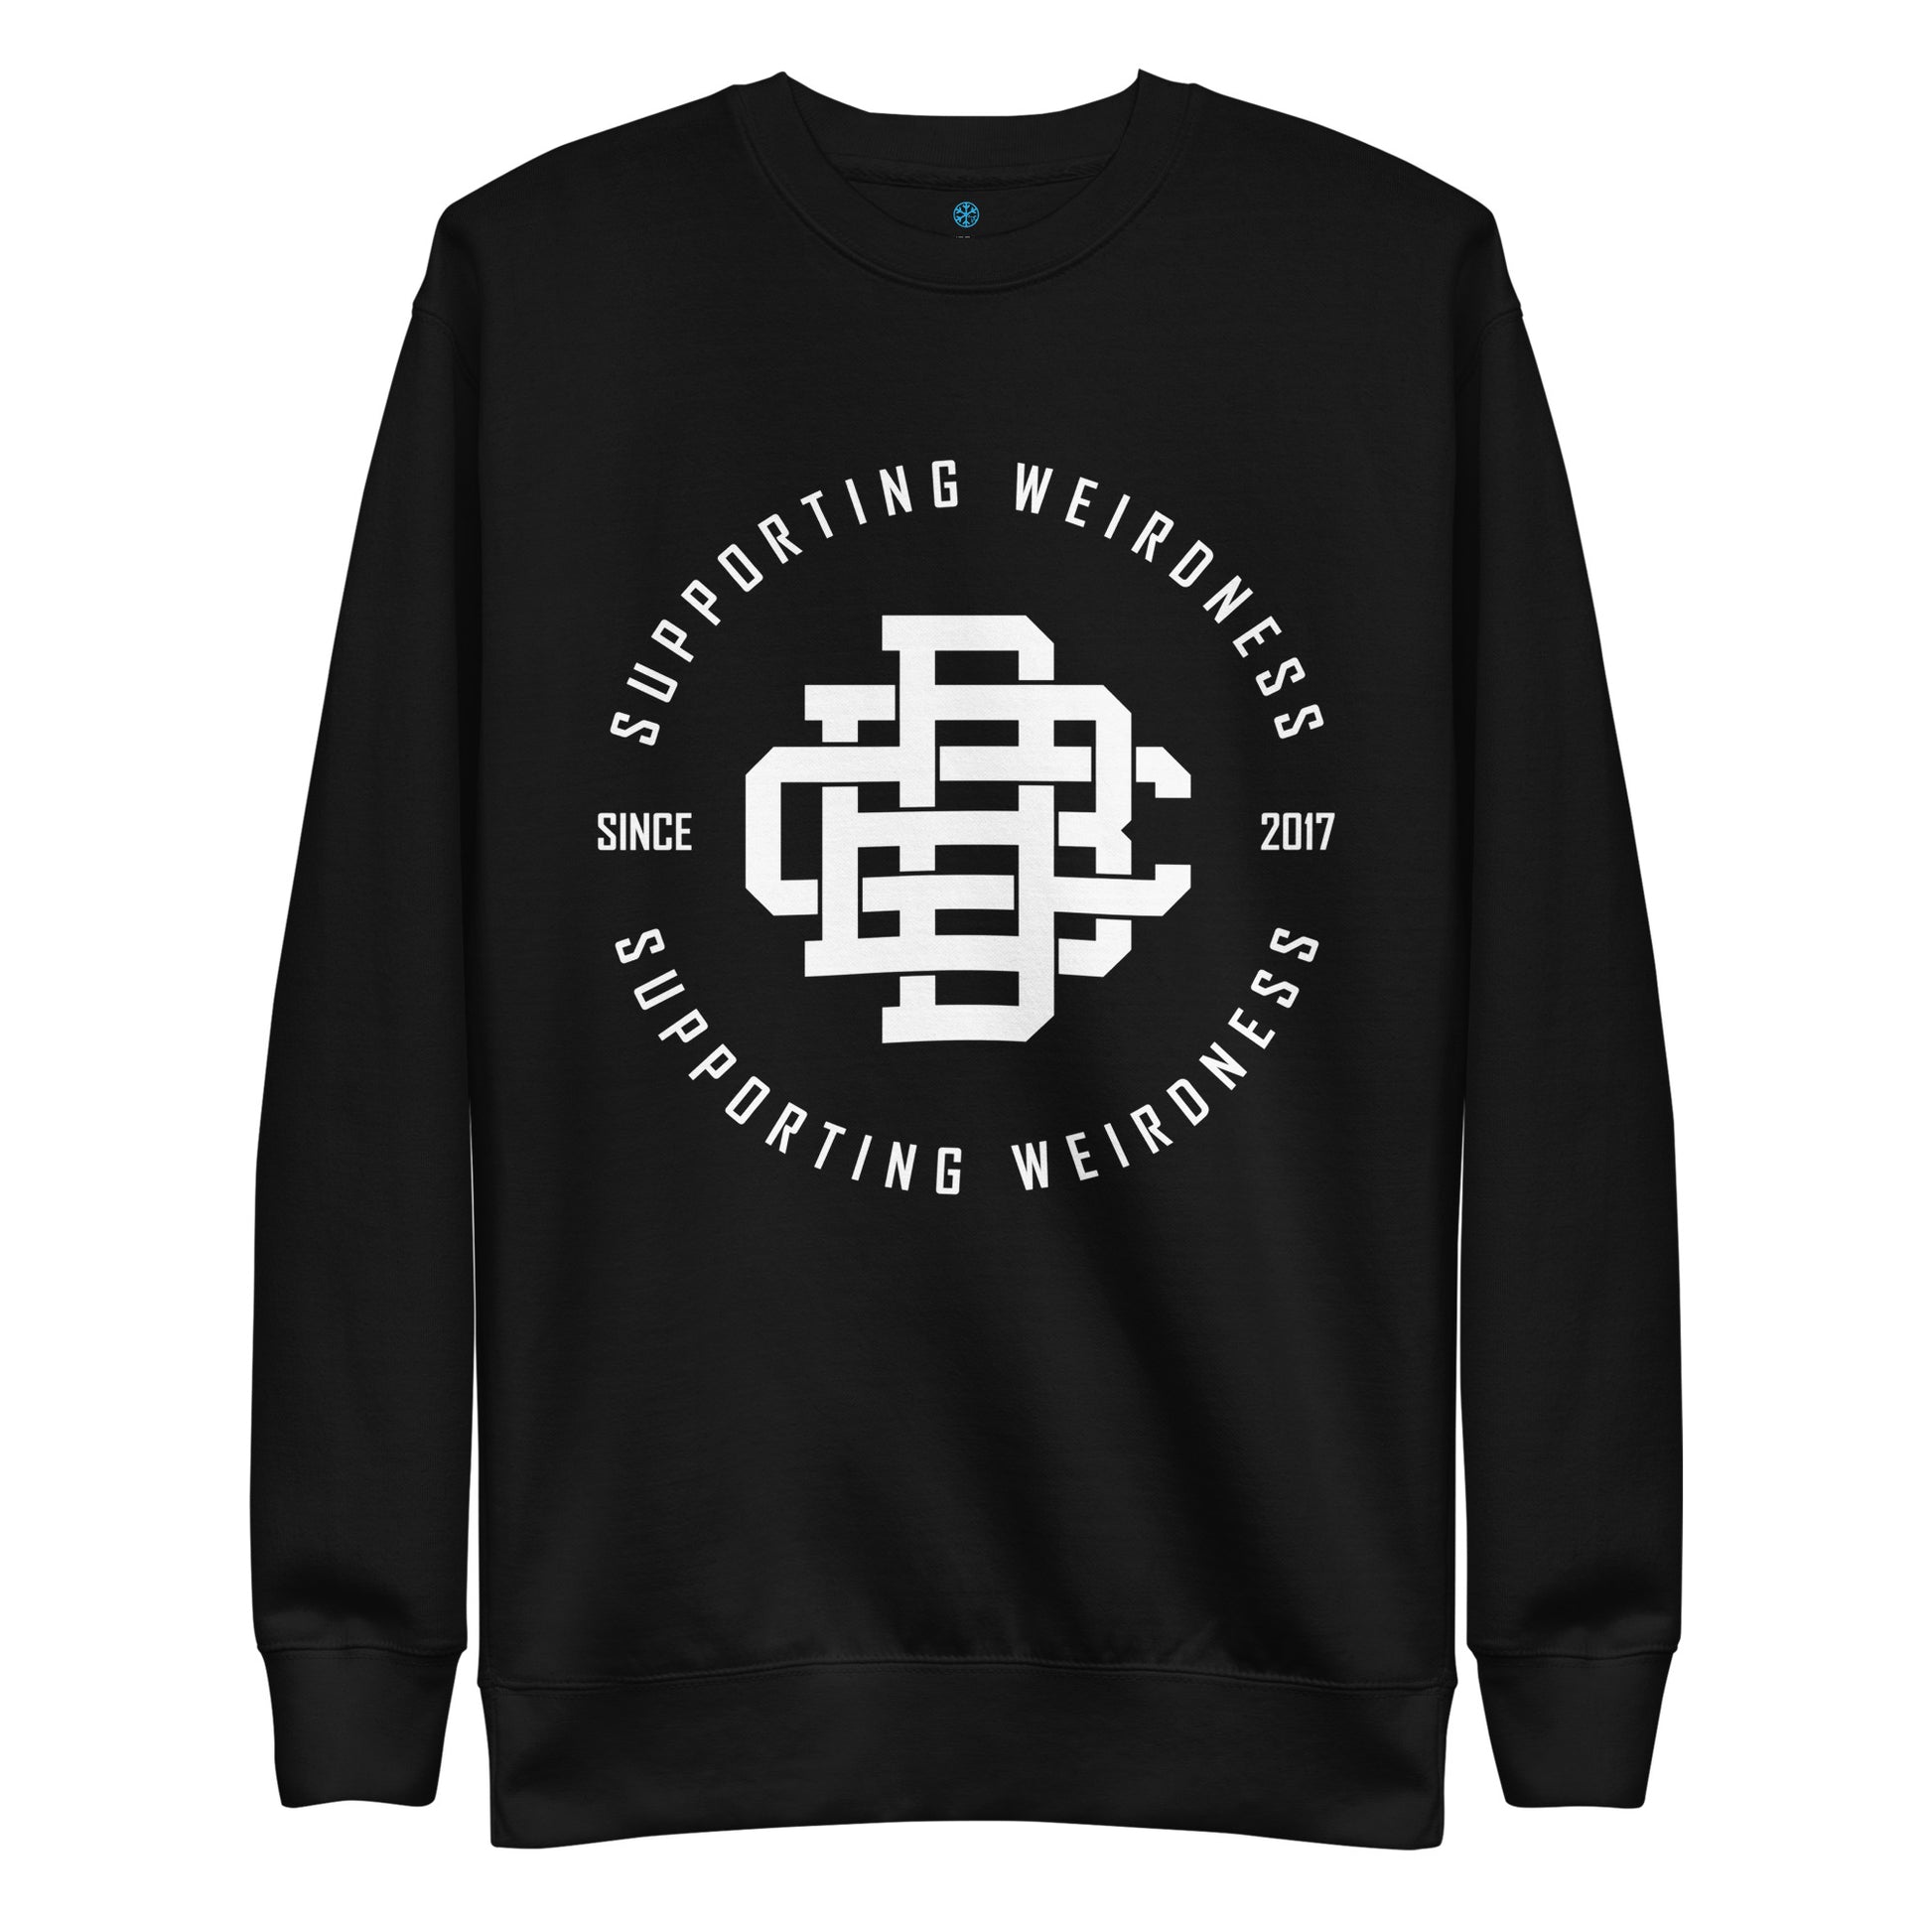 BDC sweatshirt black by B.Different Clothing street art graffiti inspired brand for weirdos, outsiders, and misfits.